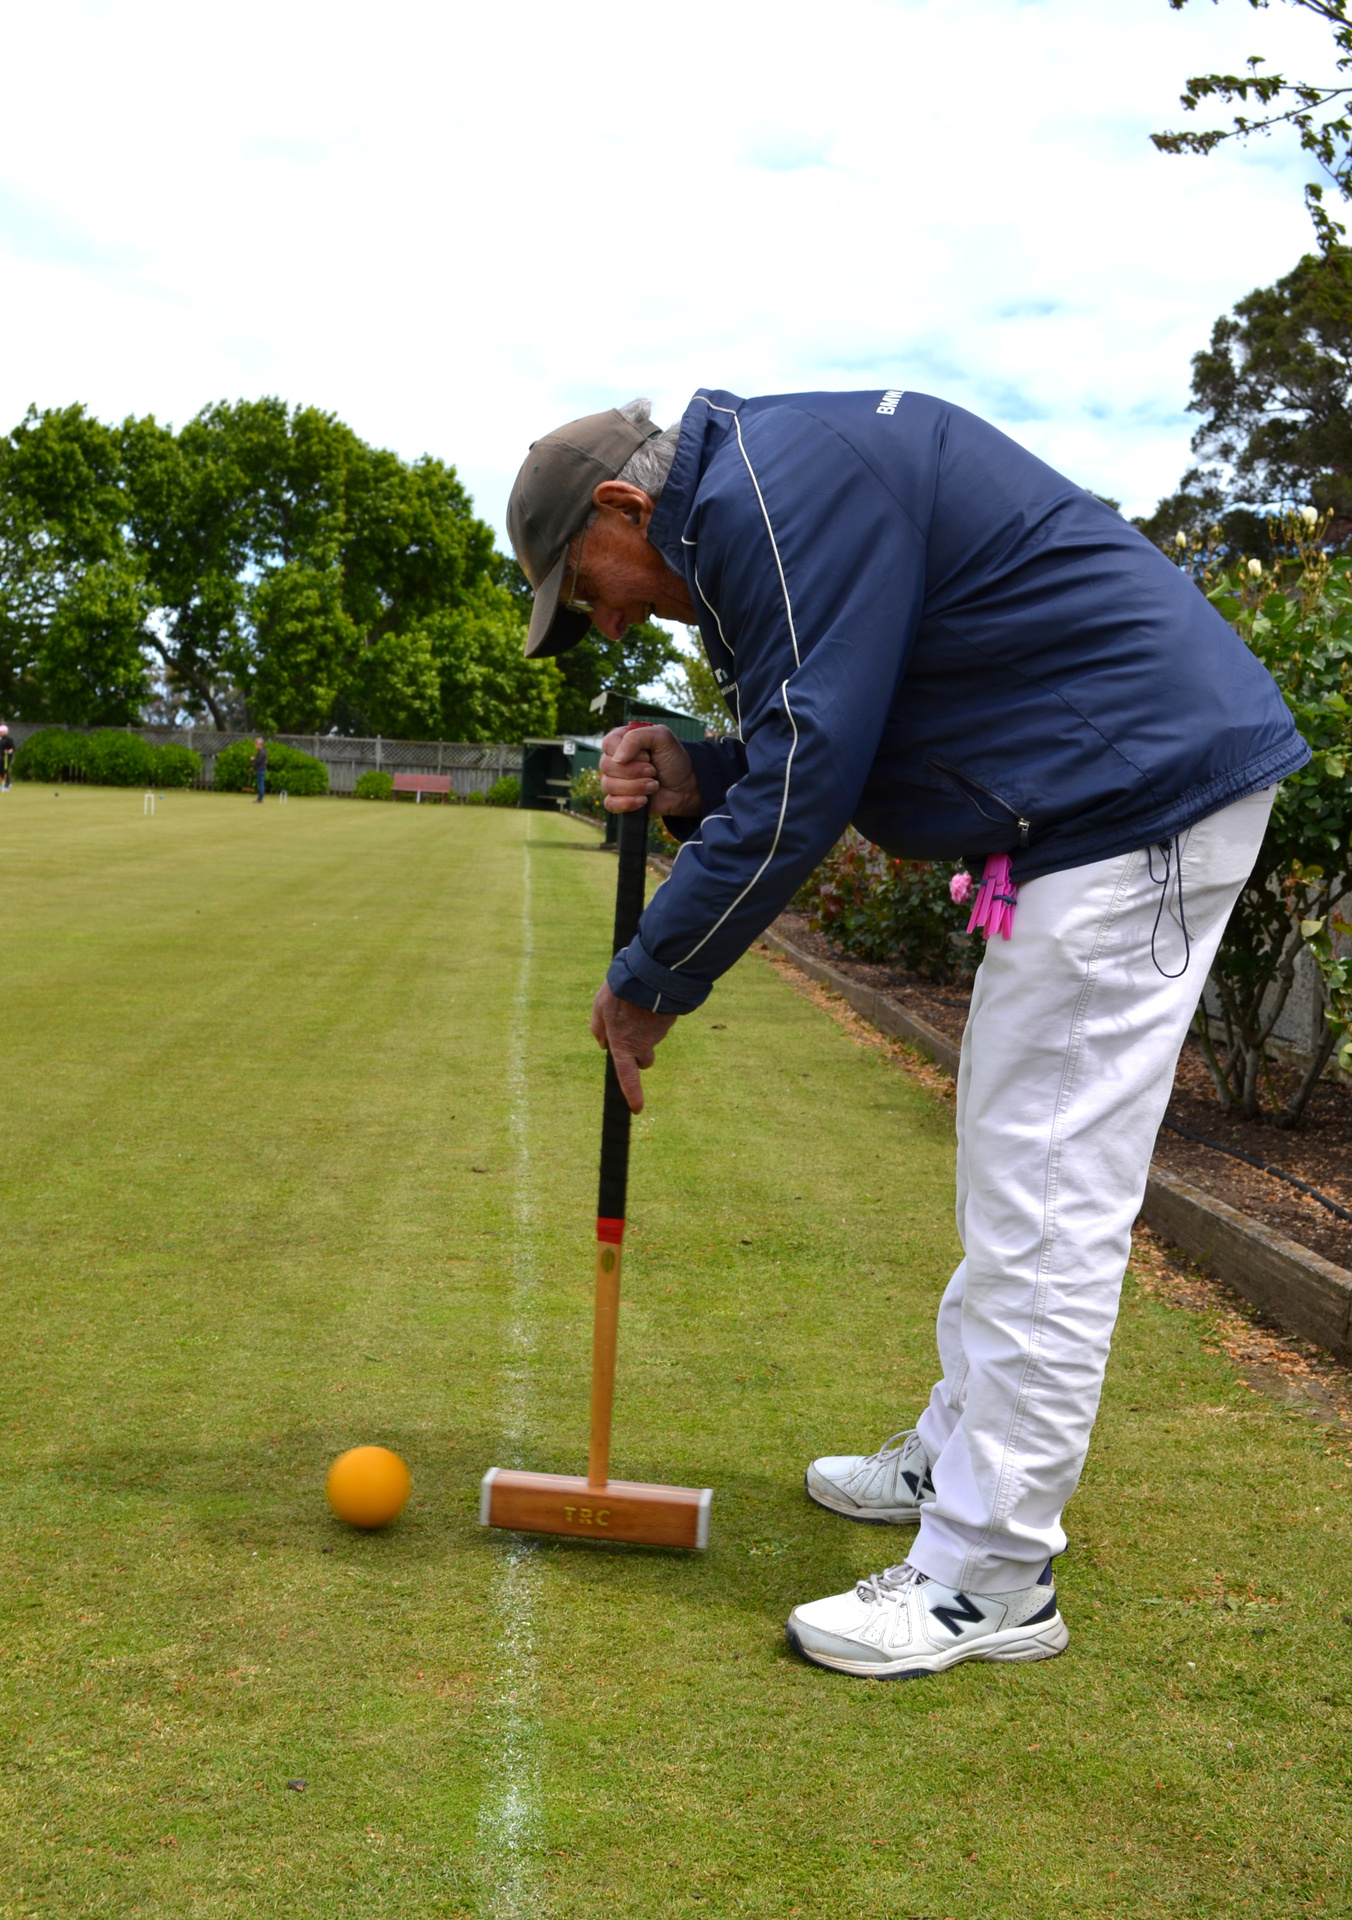 Croquet: Wanganui Croquet Club's centenary, Potted history, Terry Coxon in the game. 1360x1920 HD Wallpaper.